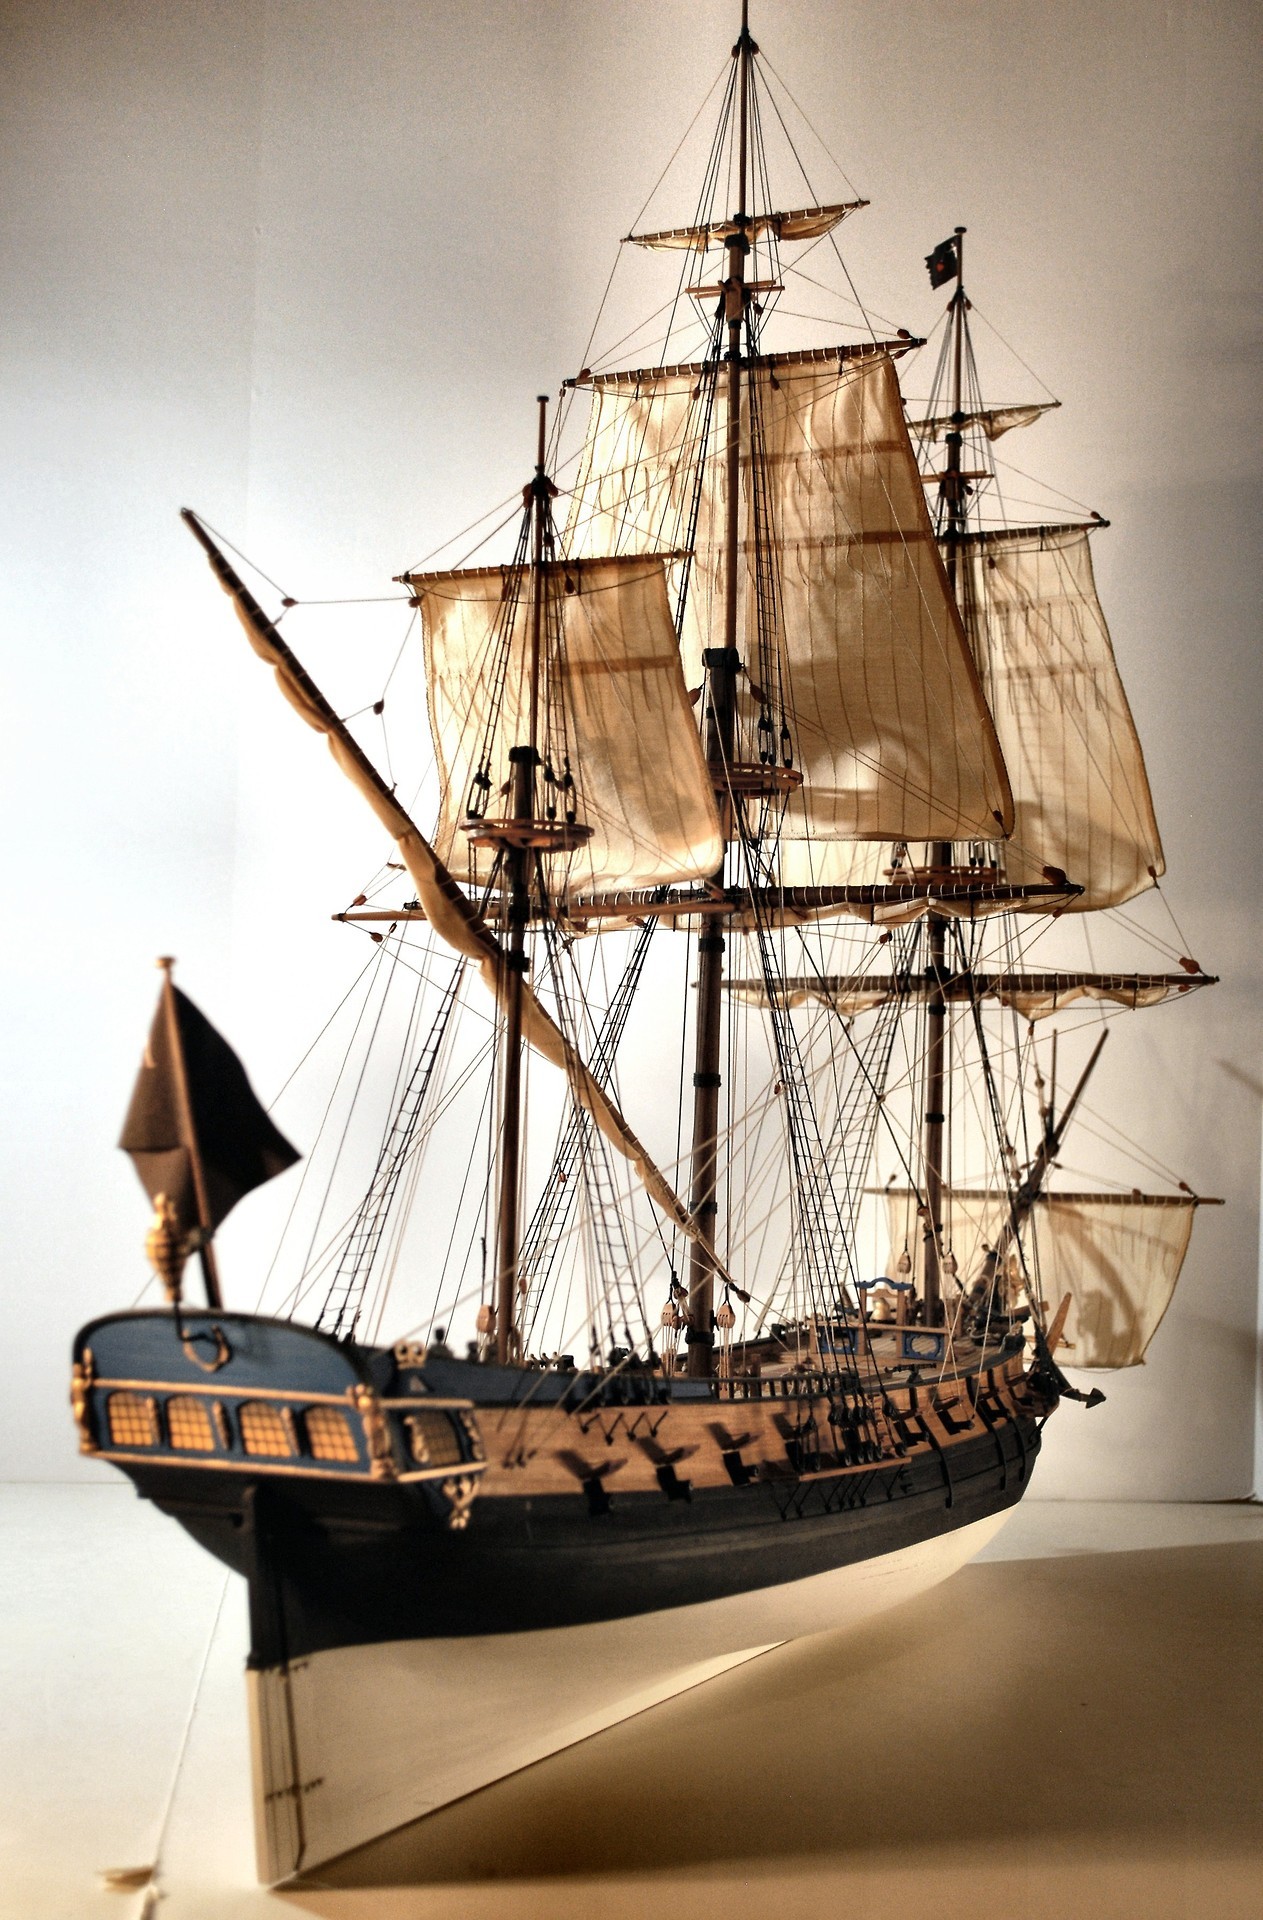 Queen Anne’s Revenge - The completed model (I think)